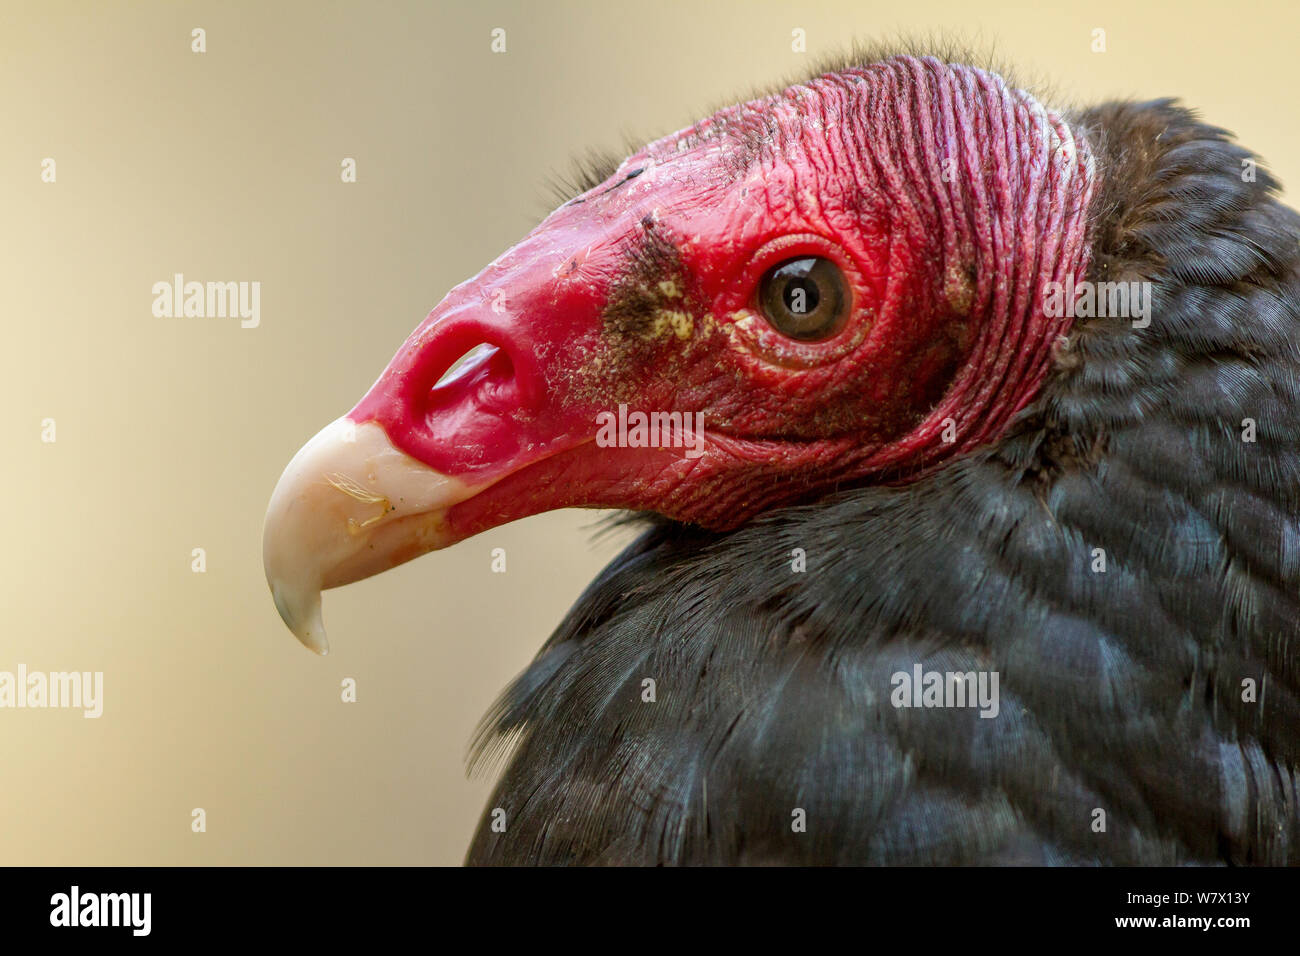 Turkey Vulture (Cathartes aura) portrait at zoo. Captive, occurs in North America. Stock Photo